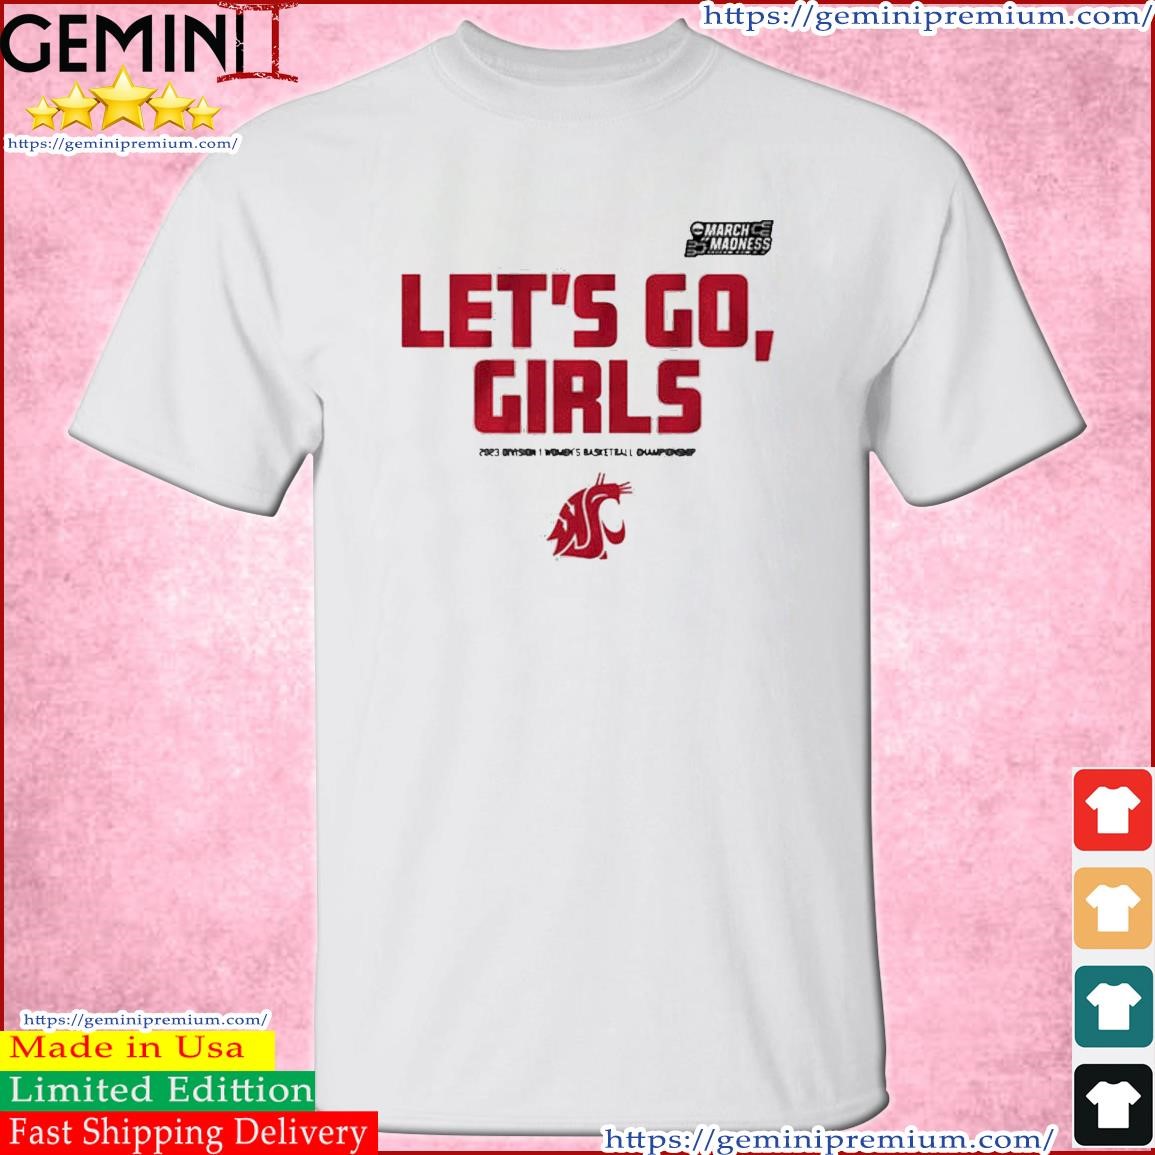 Washington State Let's Go, Girls 2023 March Madness Women's Basketball Shirt